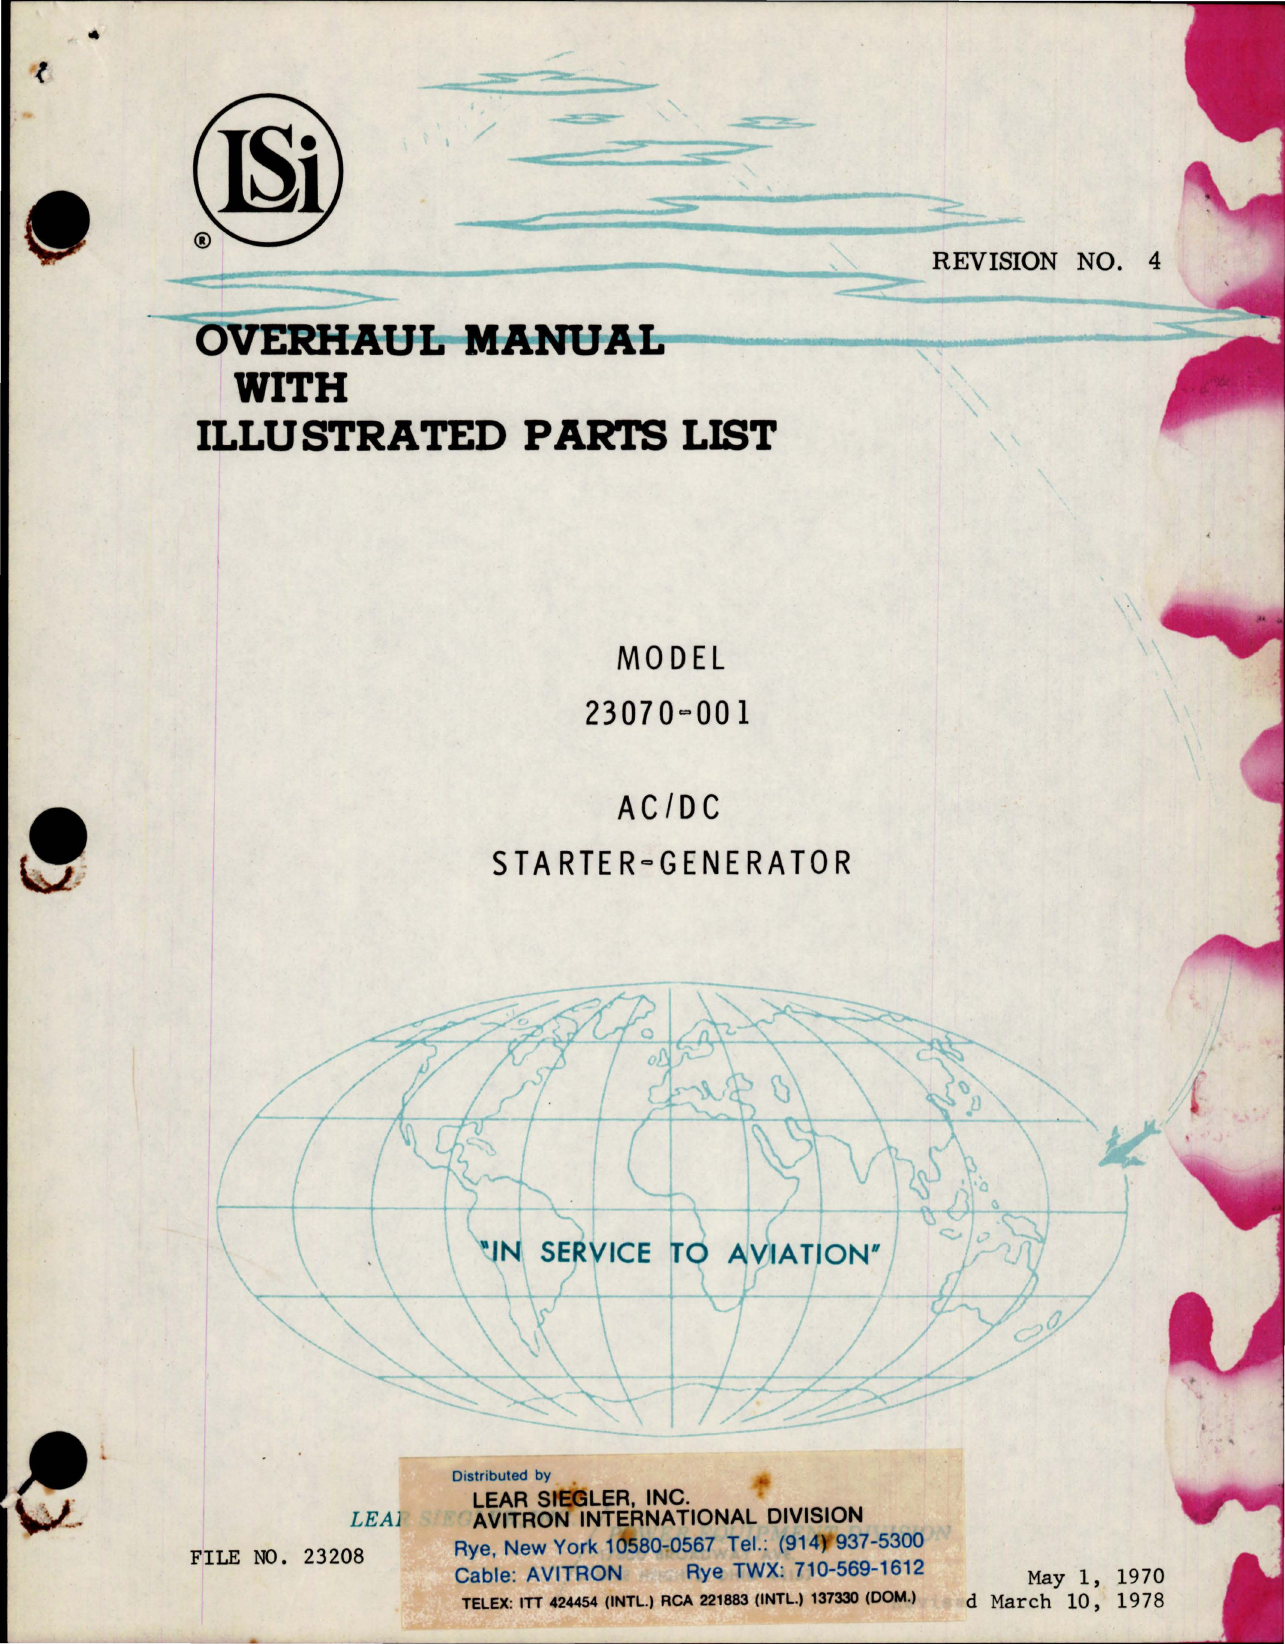 Sample page 1 from AirCorps Library document: Overhaul with Illustrated Parts List for AC-DC Starter-Generator - Model 23070-001 